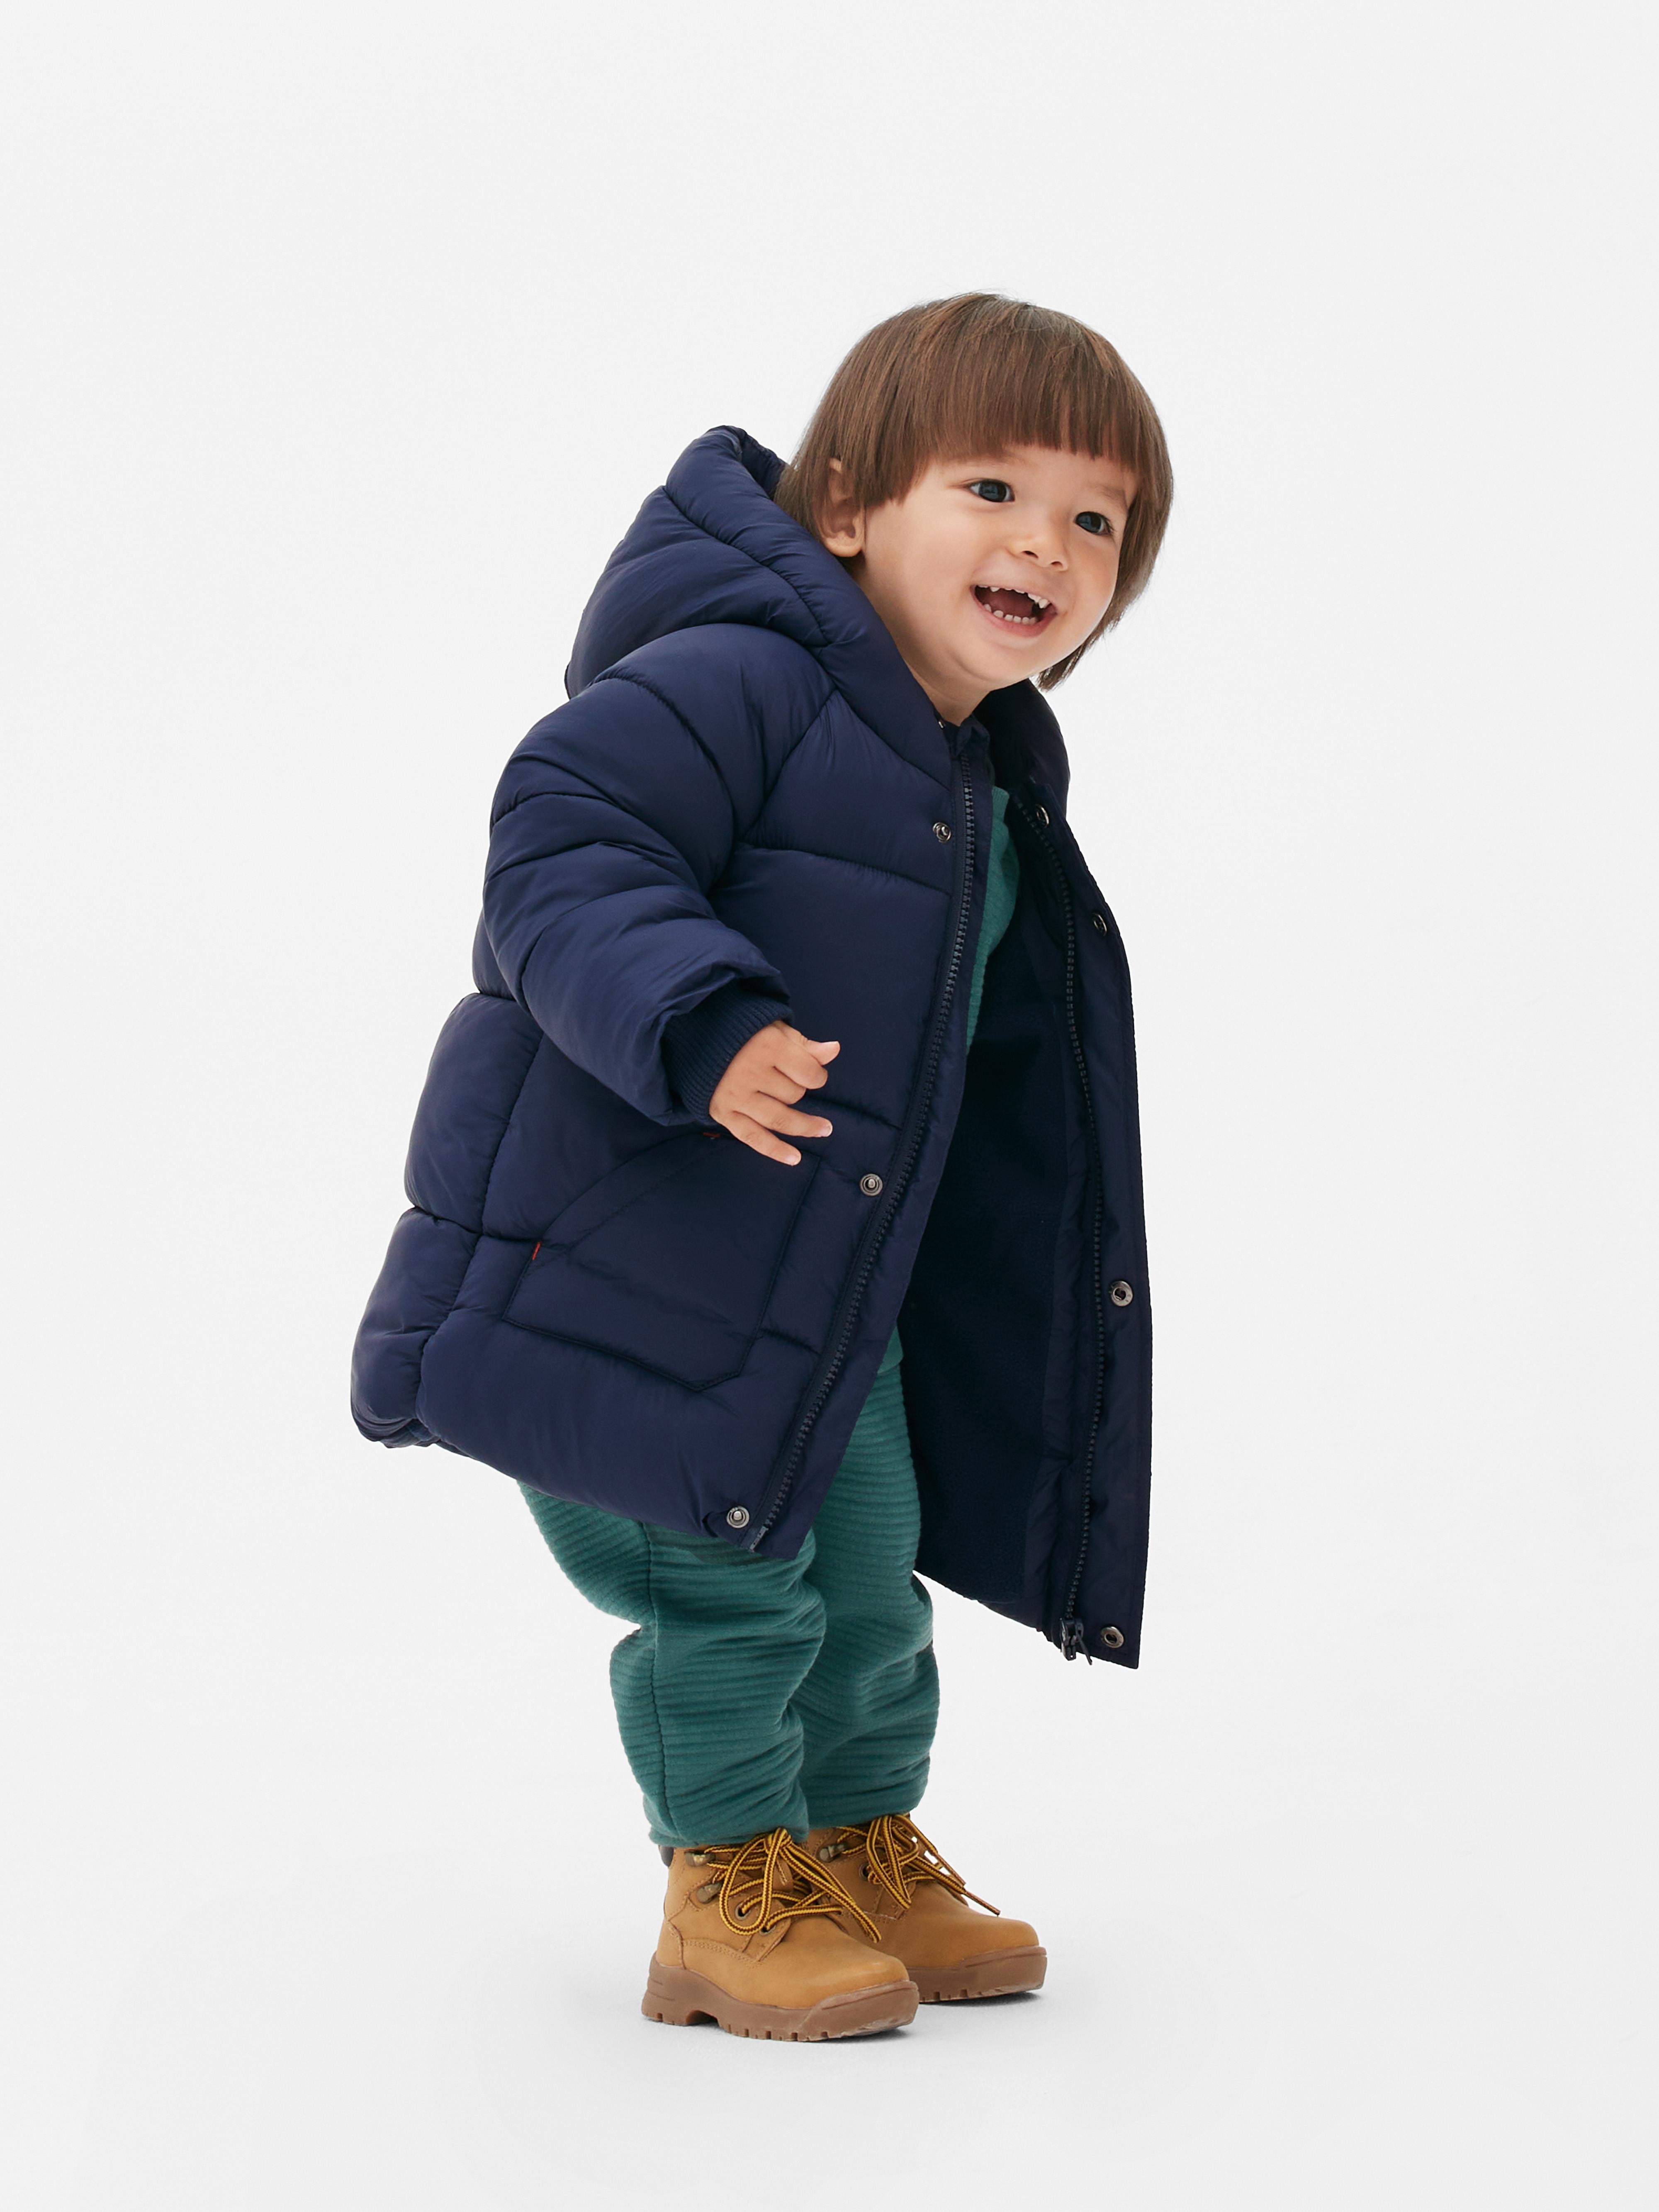 III. Factors to Consider When Choosing Outerwear for Your Baby